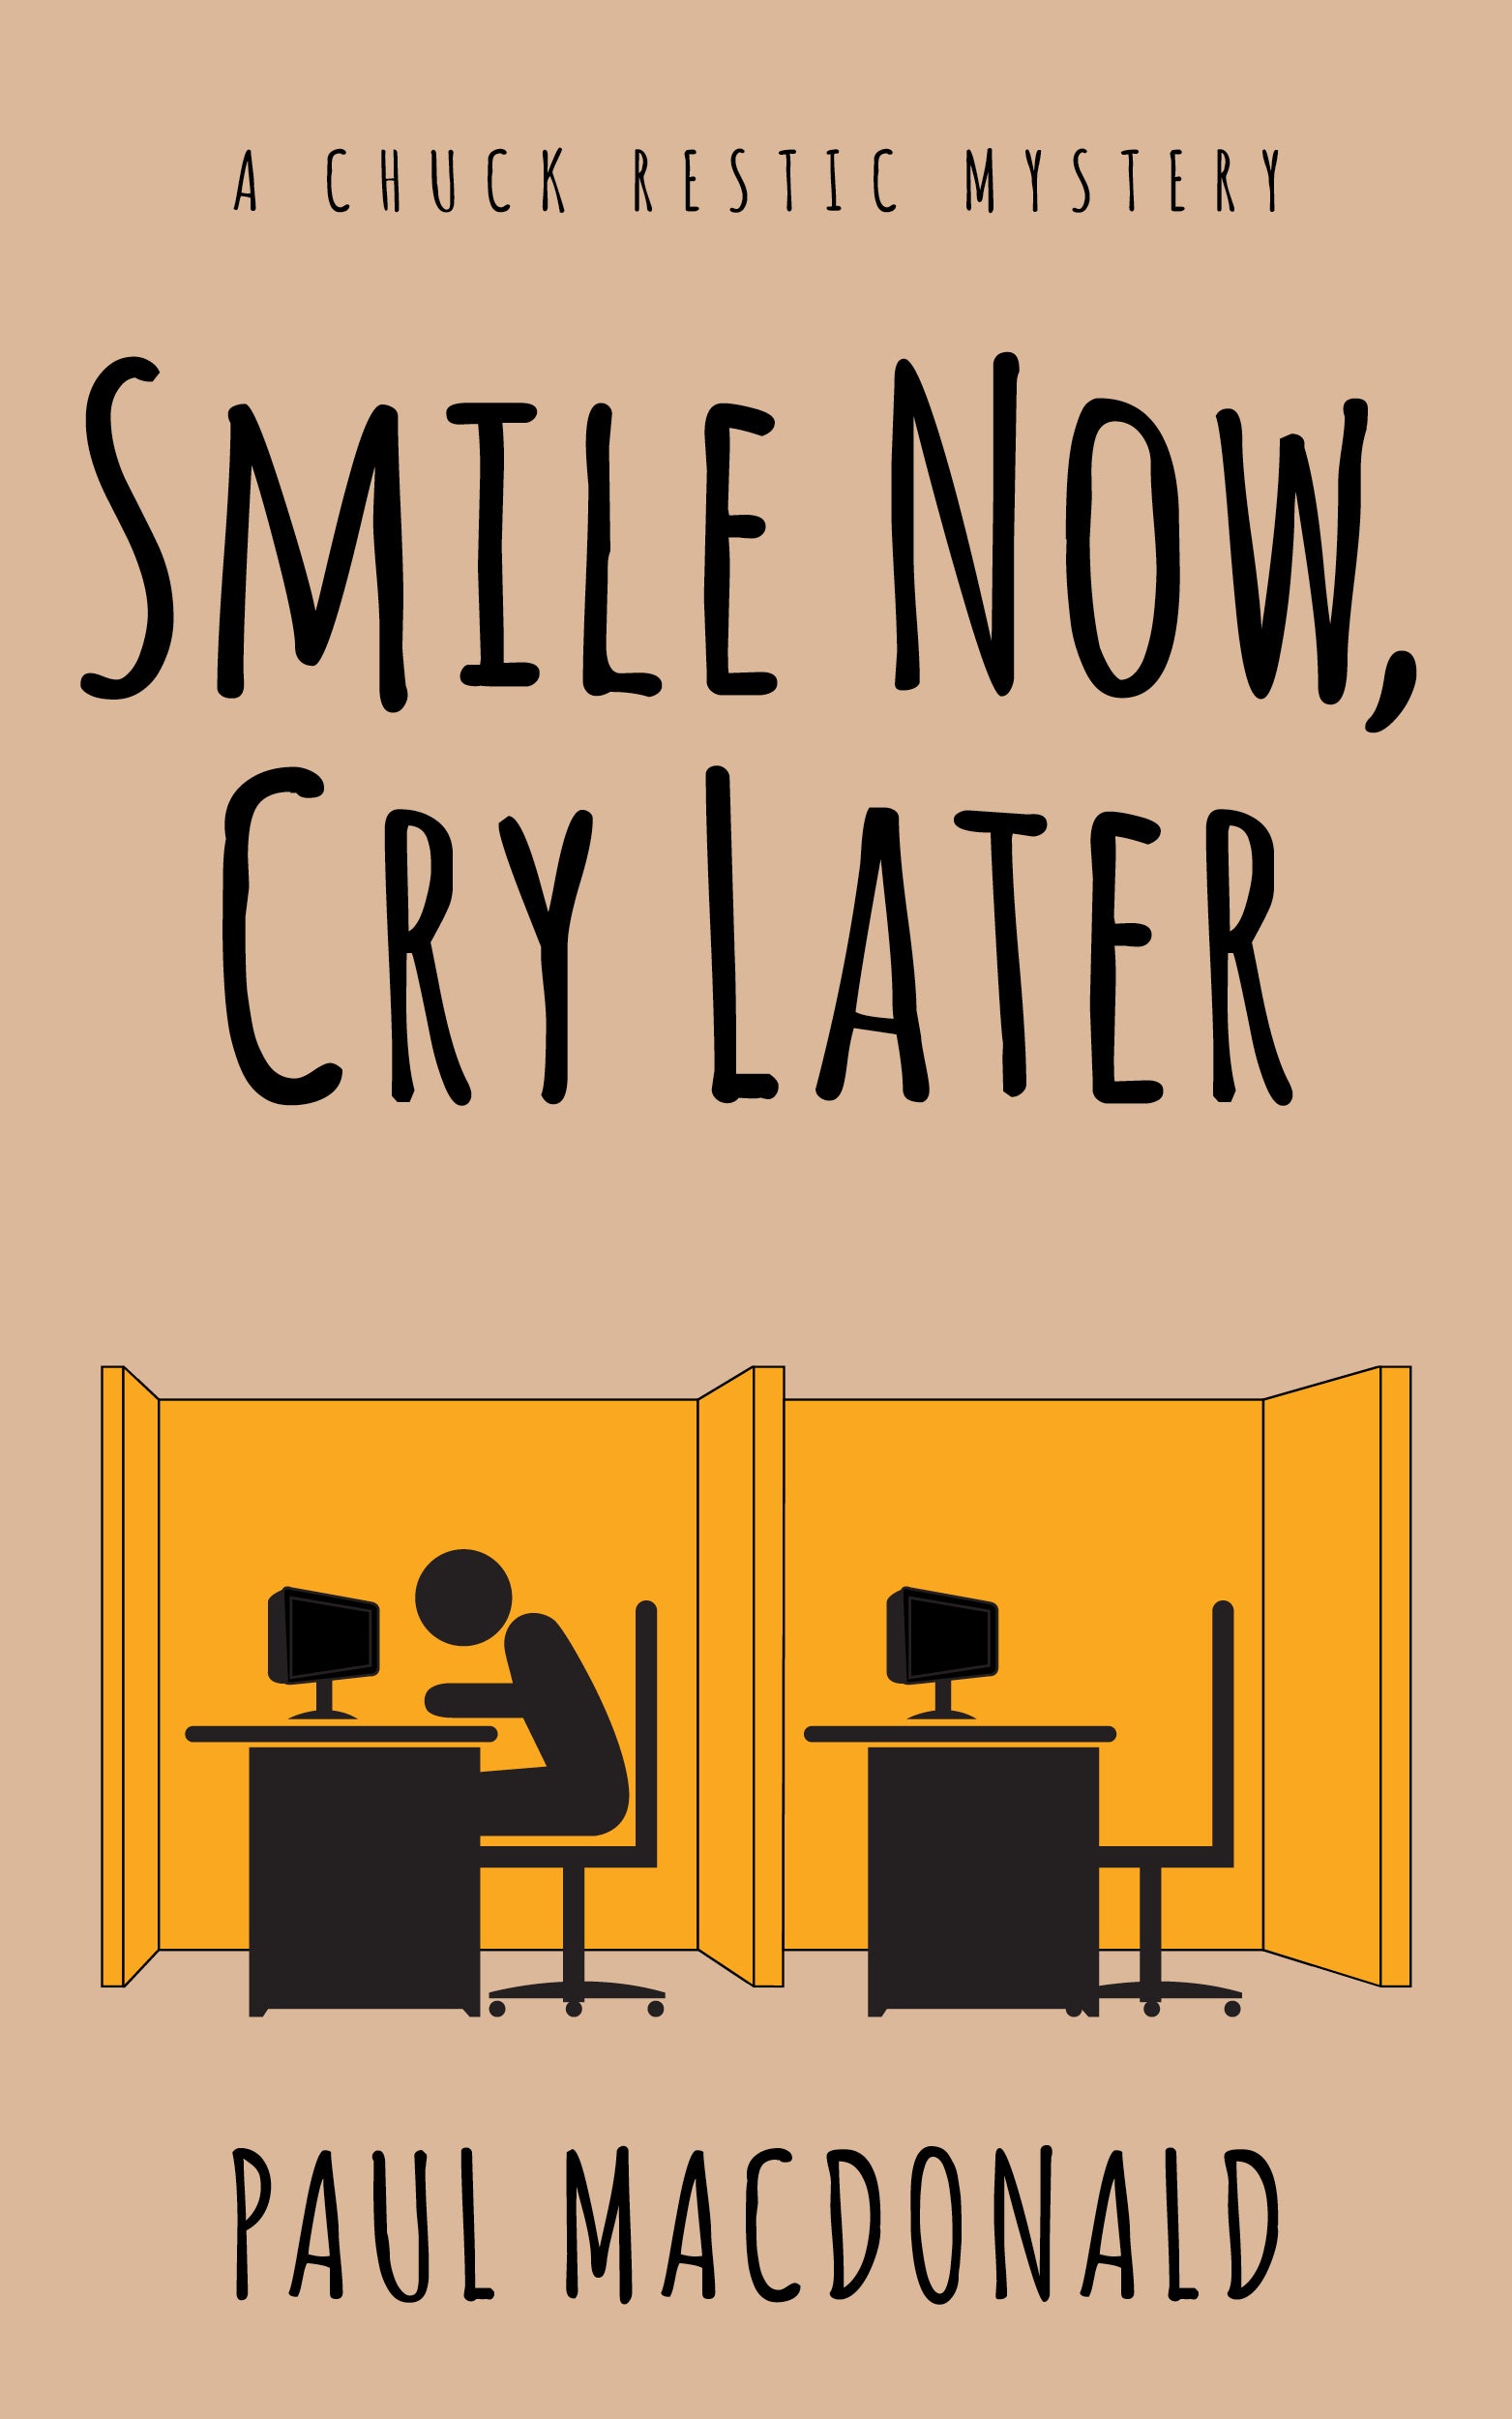 Book Review: Smile Now, Cry Later by Paul MacDonald